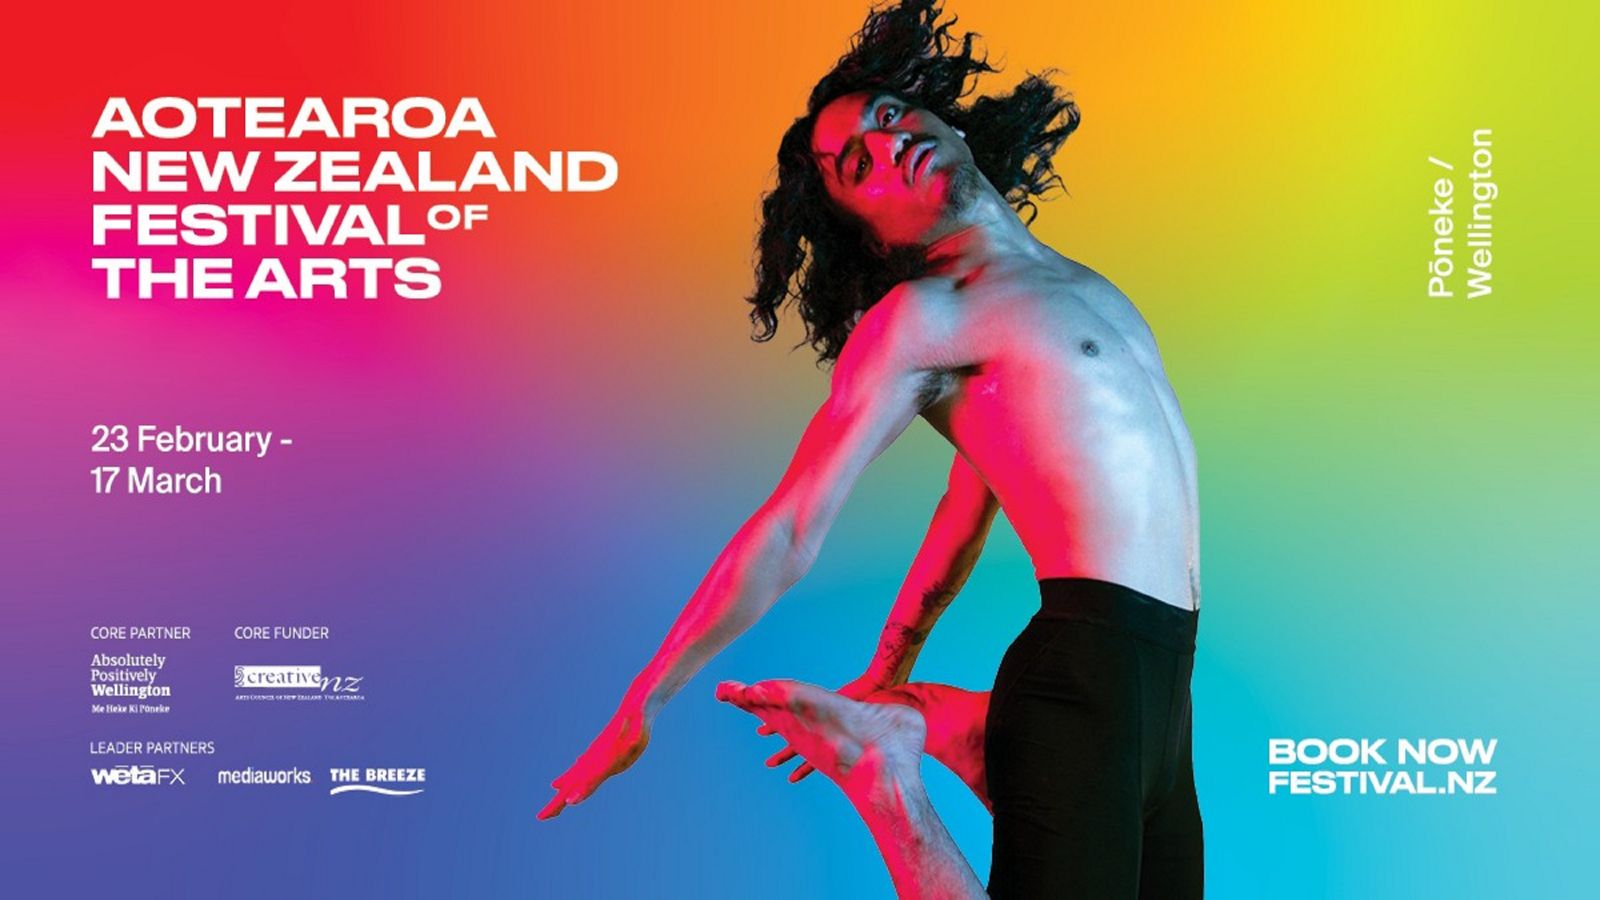  NZ Festival of Arts banner with bright coloured background and a person with long hair and black pants dancing